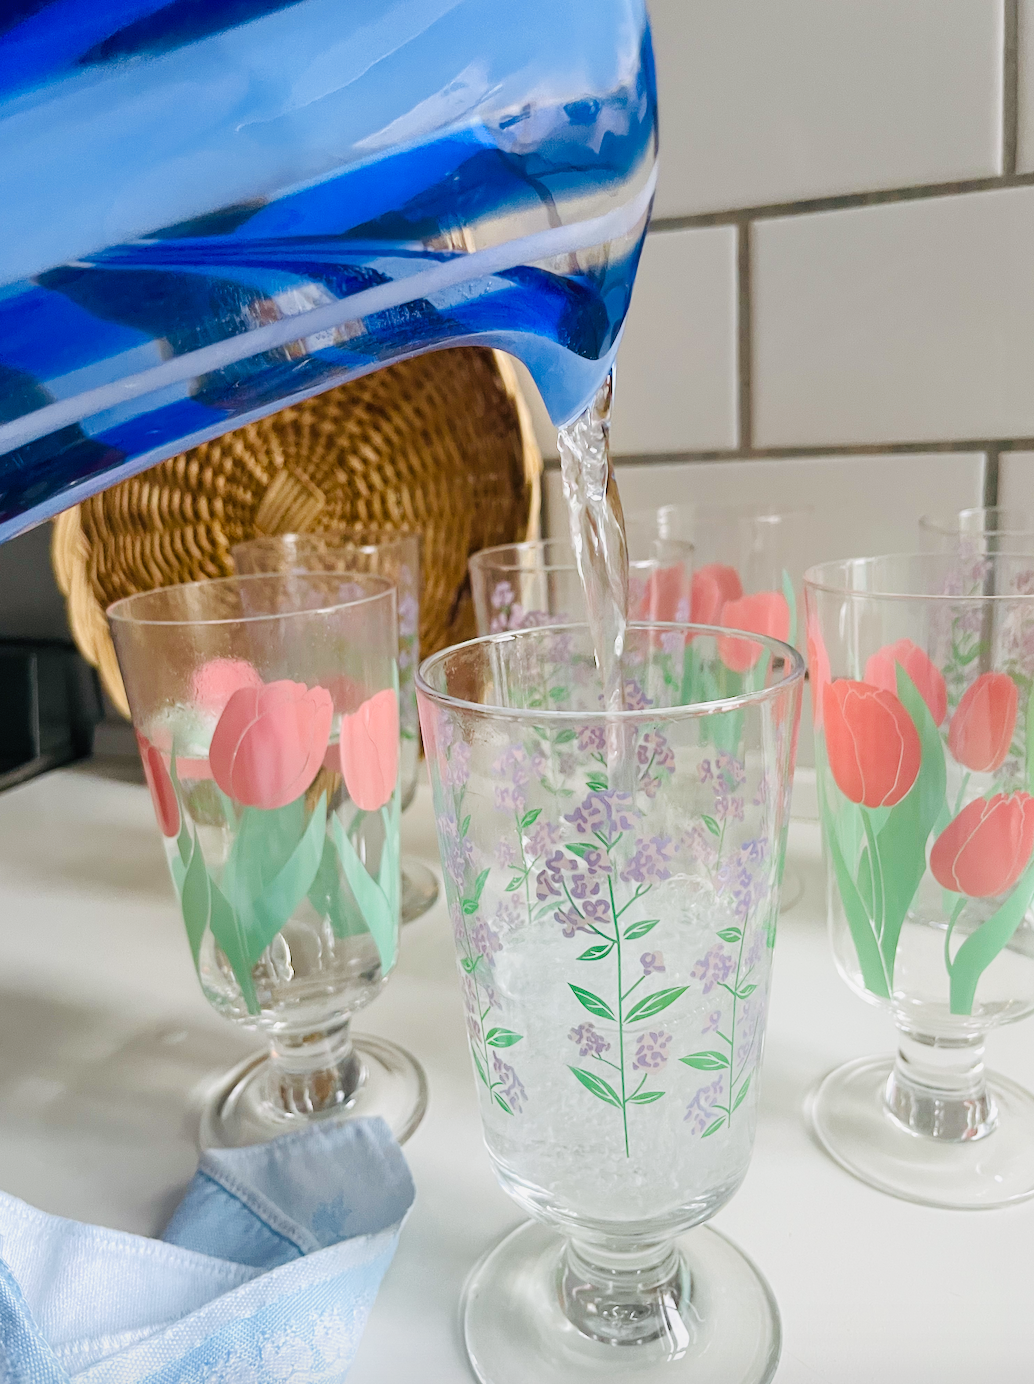 French glasses ~ Tulip